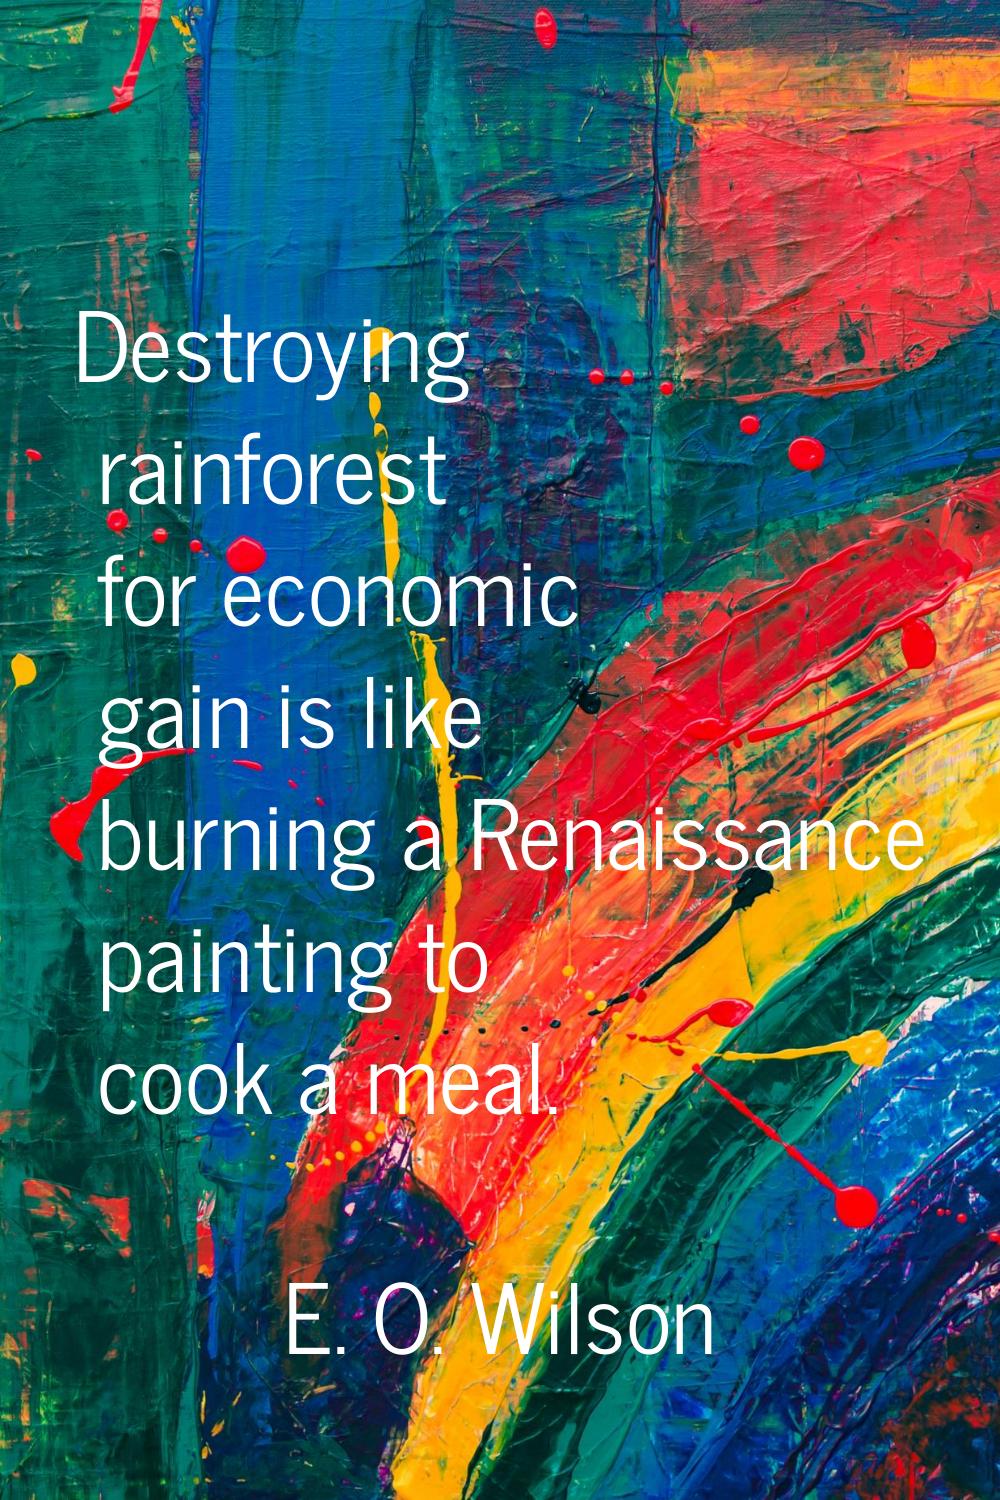 Destroying rainforest for economic gain is like burning a Renaissance painting to cook a meal.